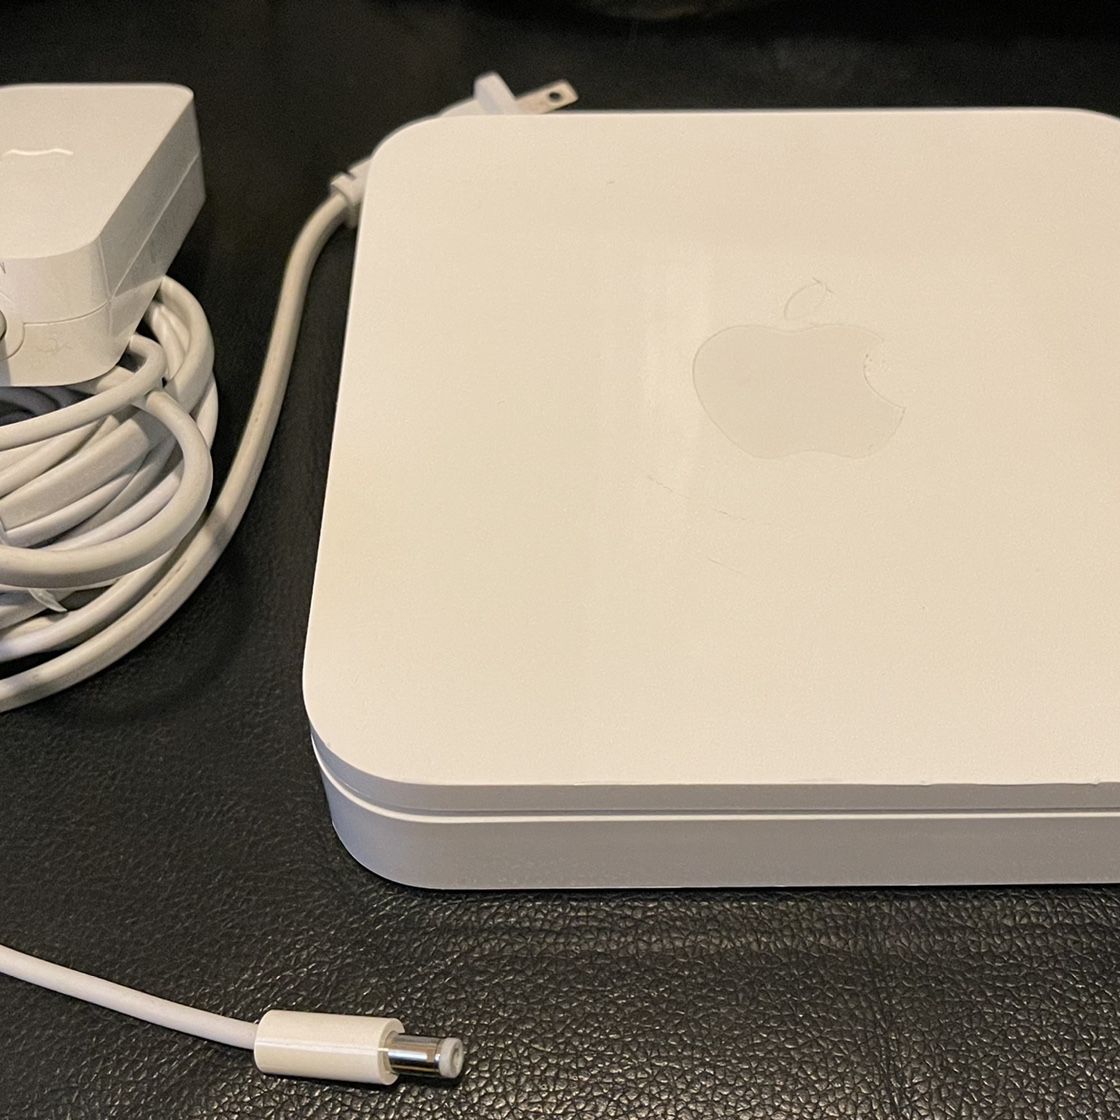 Apple AirPort Extreme Base Station (WiFi Home Router)